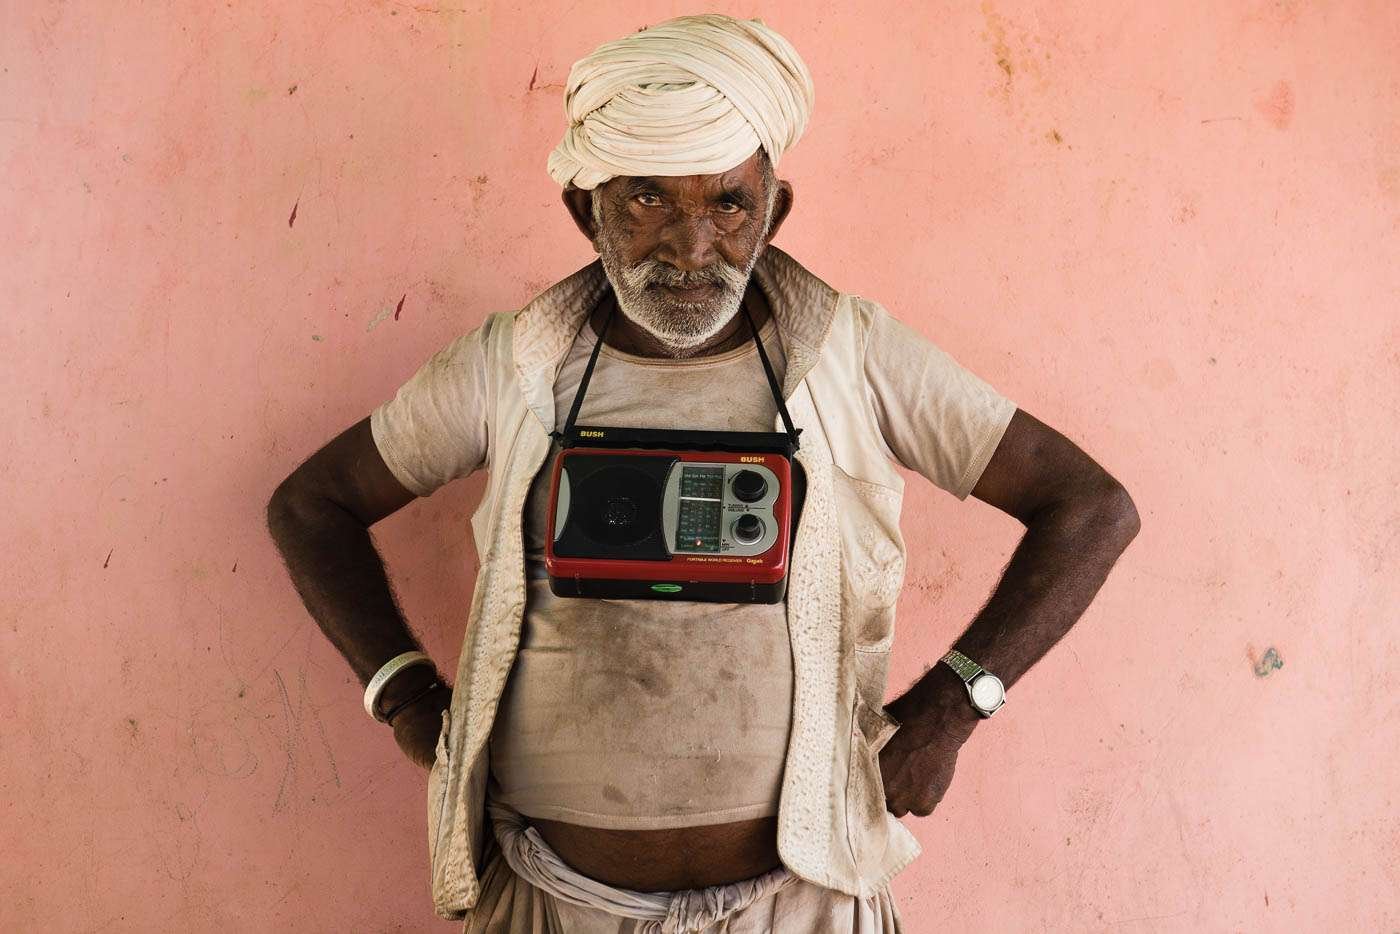 In Gujarat, India, a farmer from the pastoral Ahir tribe poses good-humouredly for an impromptu photograph.